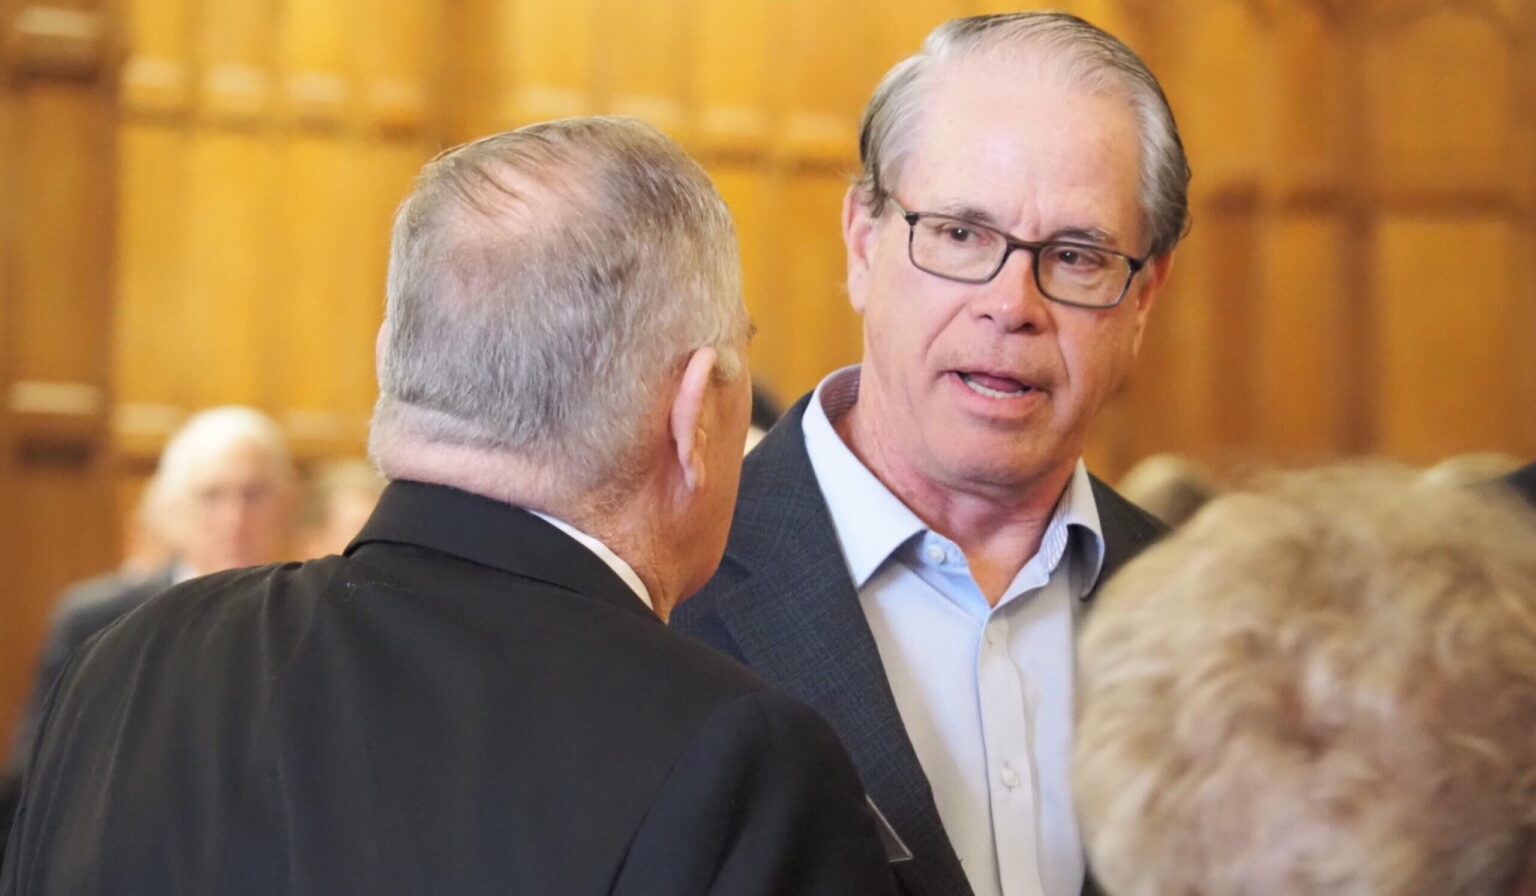 U.S. Mike Braun leans heavily on his record in Congress and health care background in his gubernatorial campaign to succeed Gov. Eric Holcomb. (Whitney Downard/Indiana Capital Chronicle)